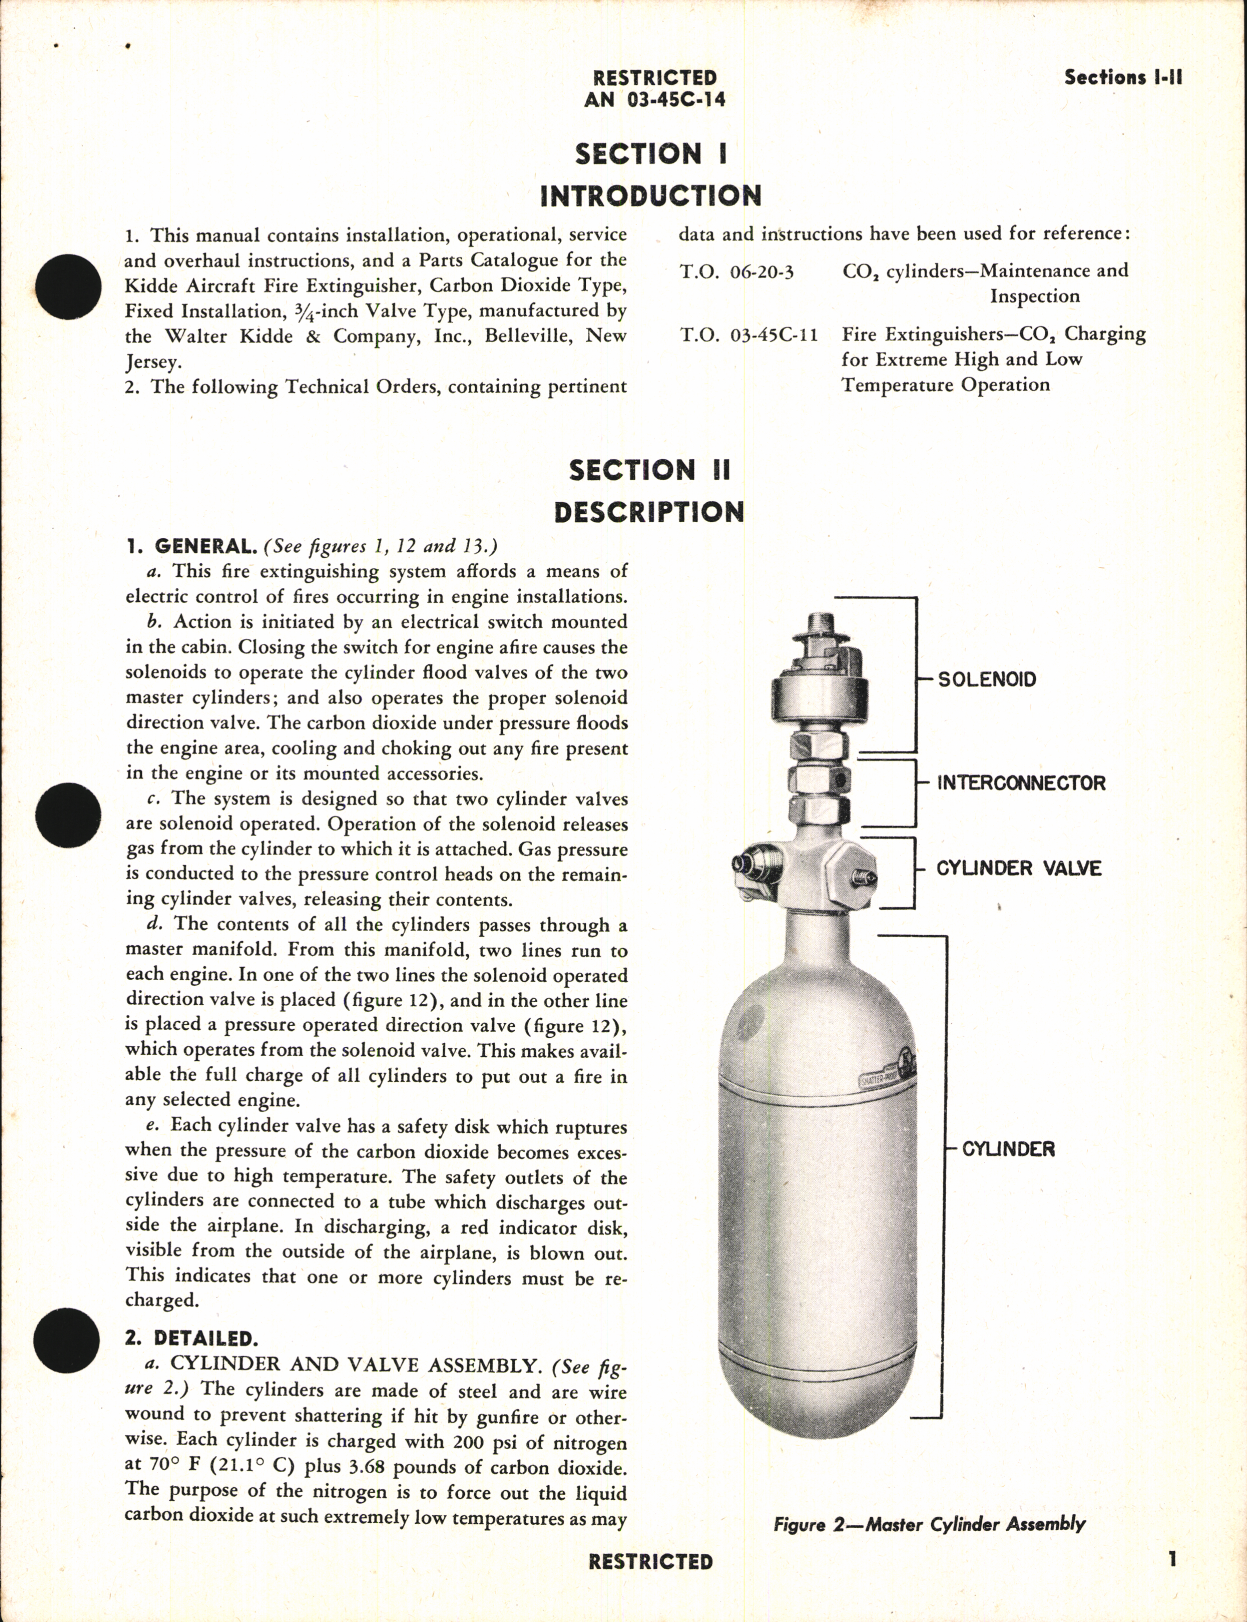 Sample page 5 from AirCorps Library document: Handbook of Instructions with Parts Catalog for 3/4 Inch Valve Type Aircraft Carbon Dioxide Fire Extinguisher